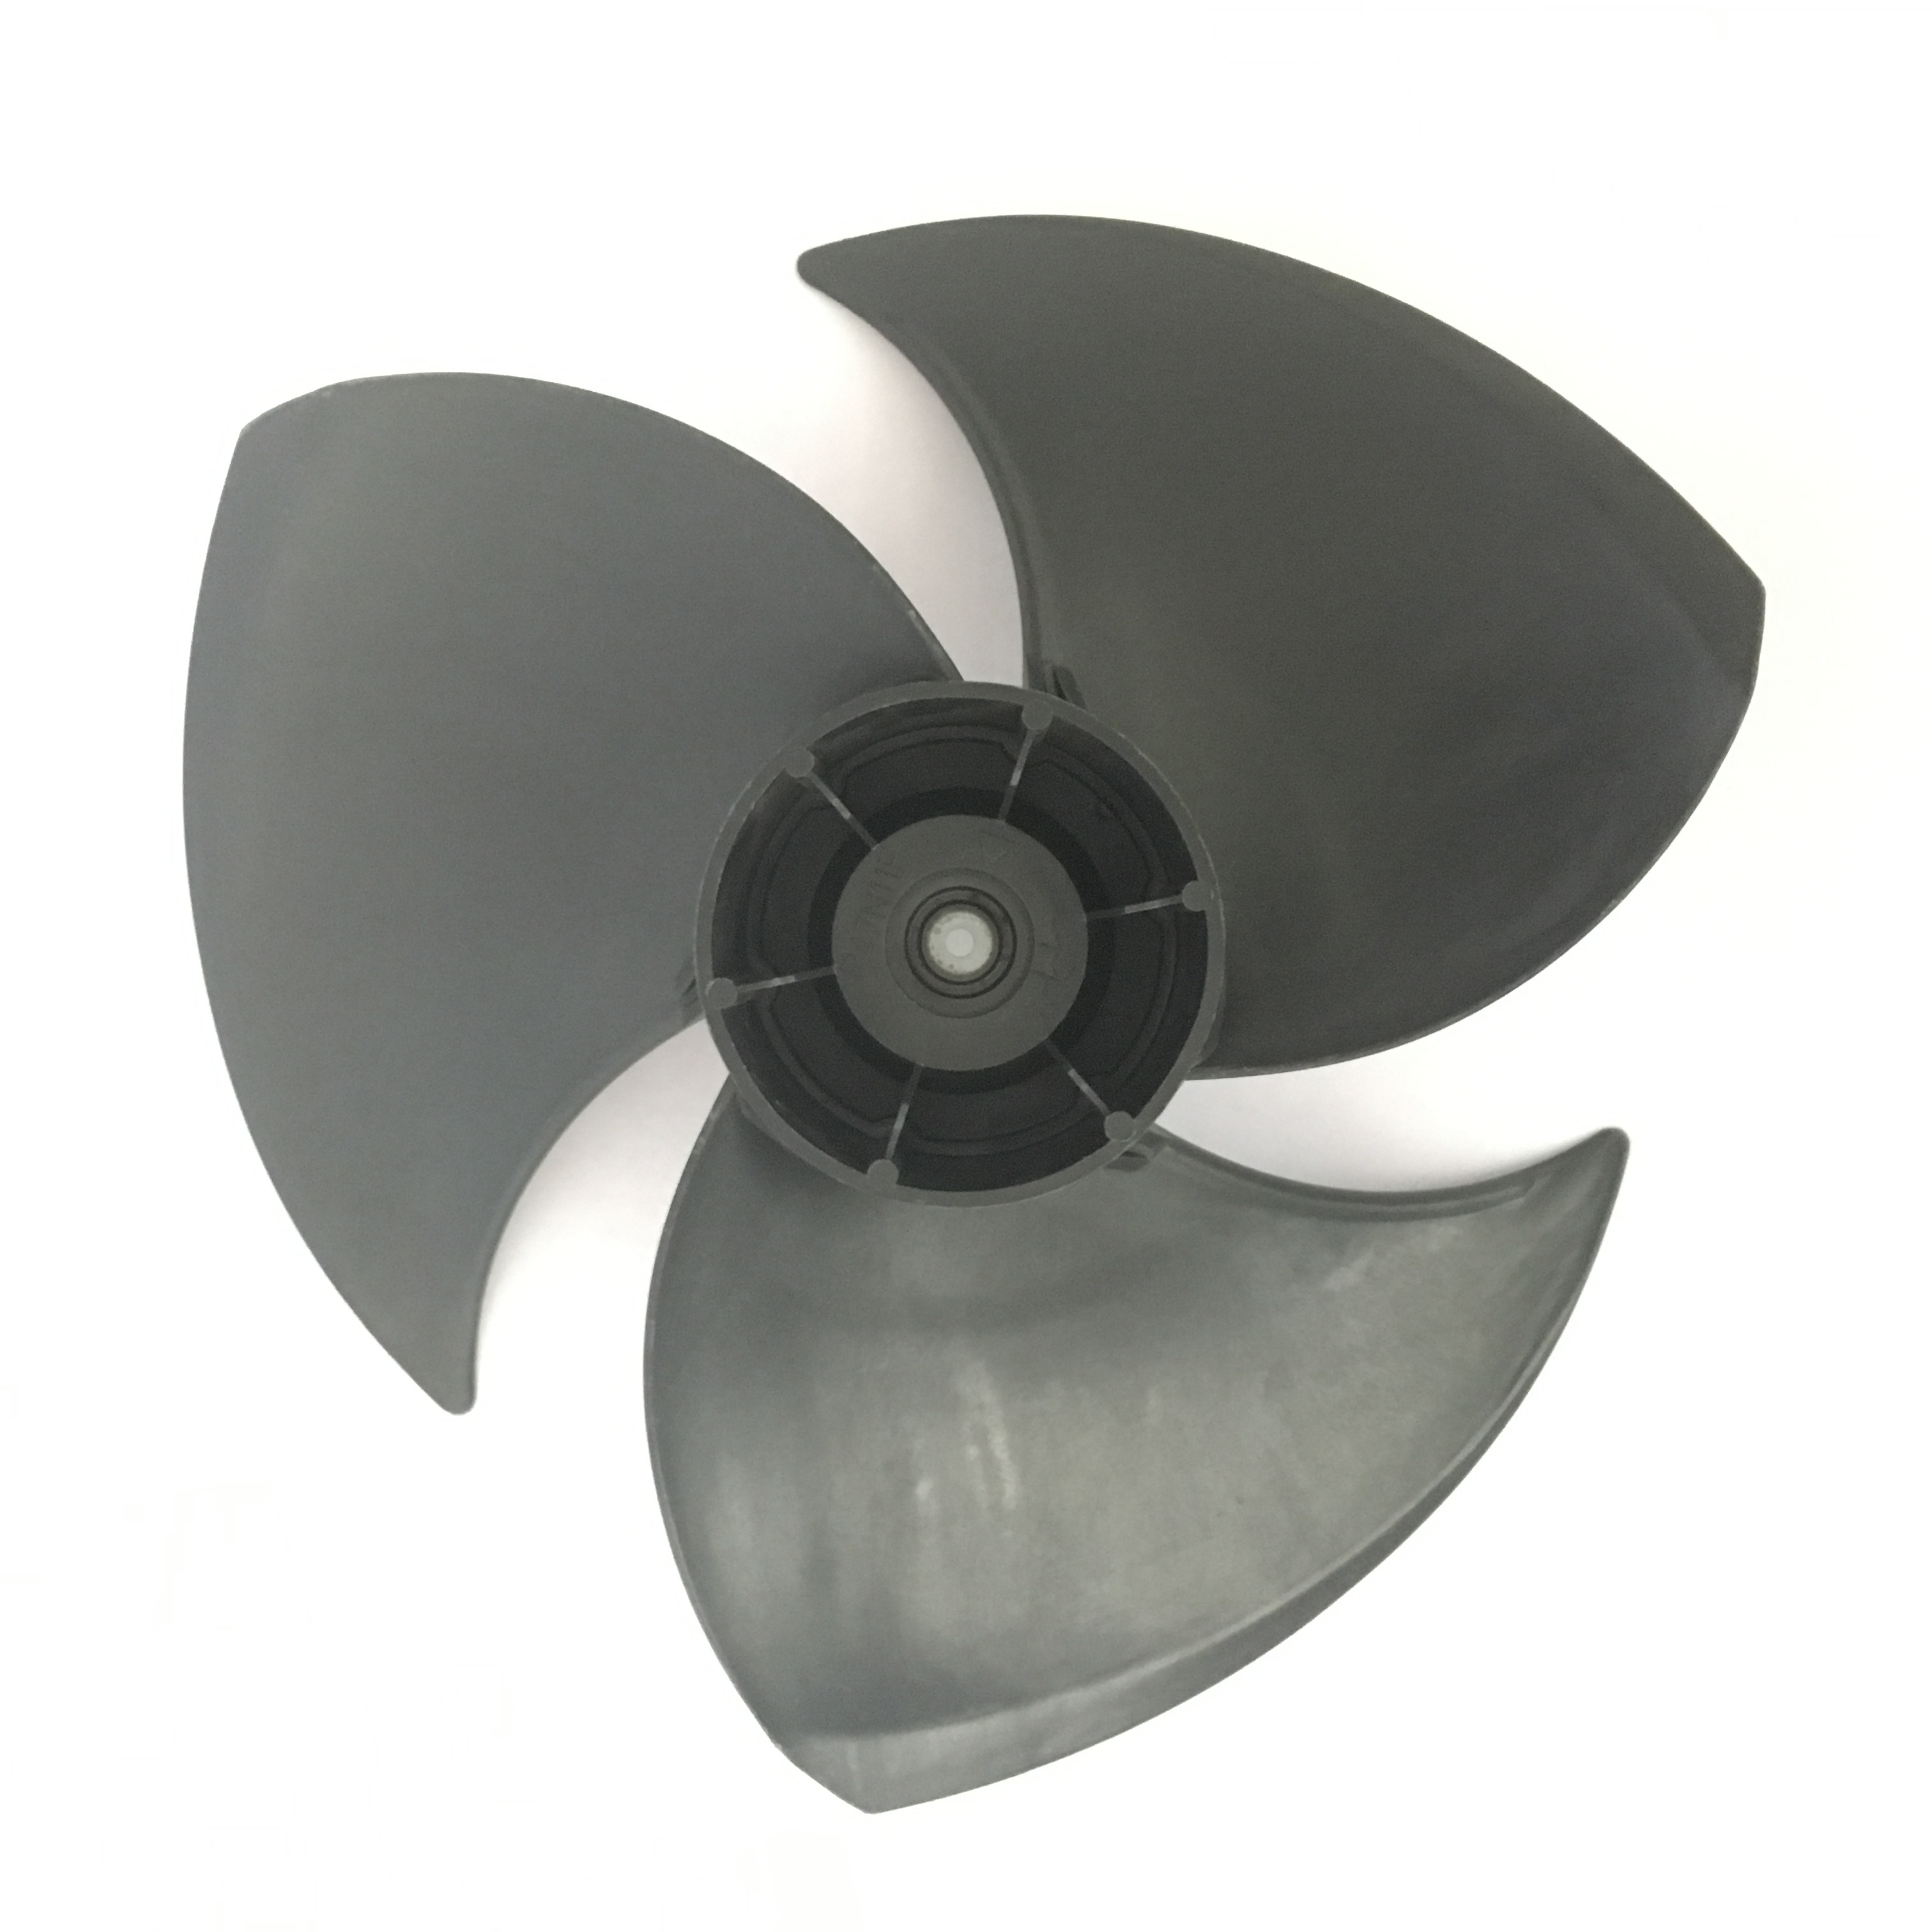 Fan mould technology project are opening 